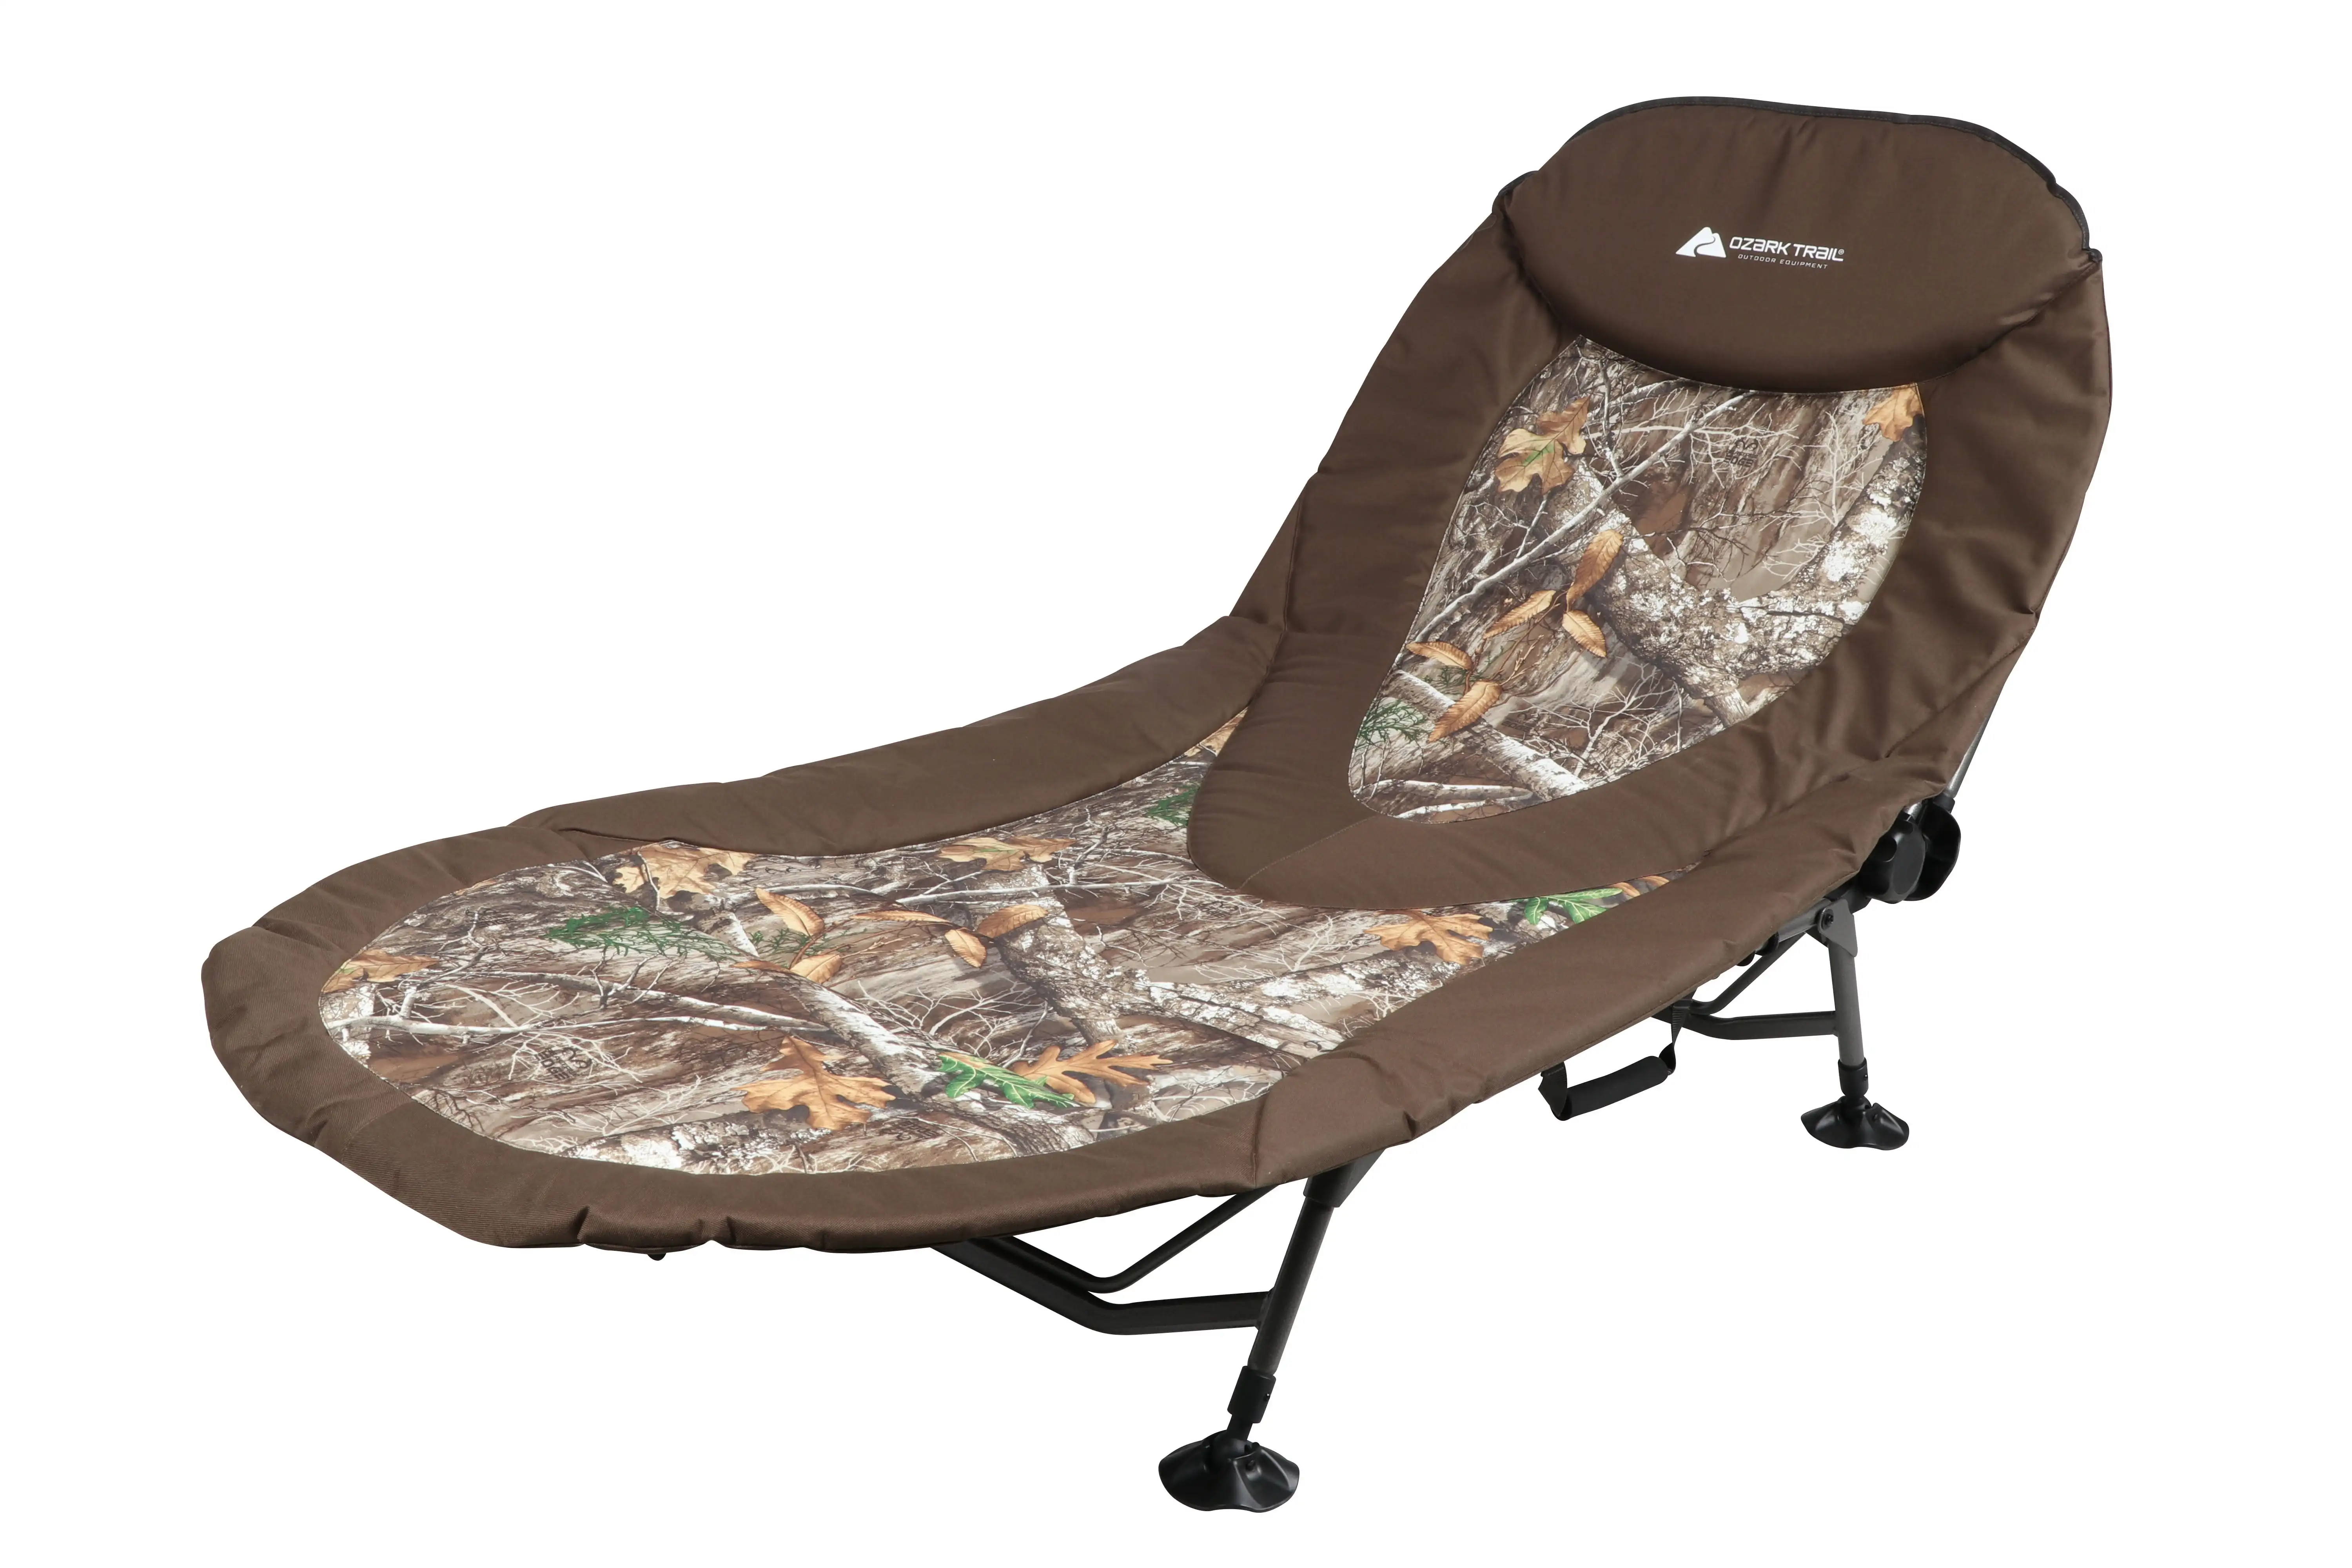 

North Fork Adjustable Camo Camping Cot, Green, 77.9"L x 31"W camping bed hammock camping cot folding bed camp bed